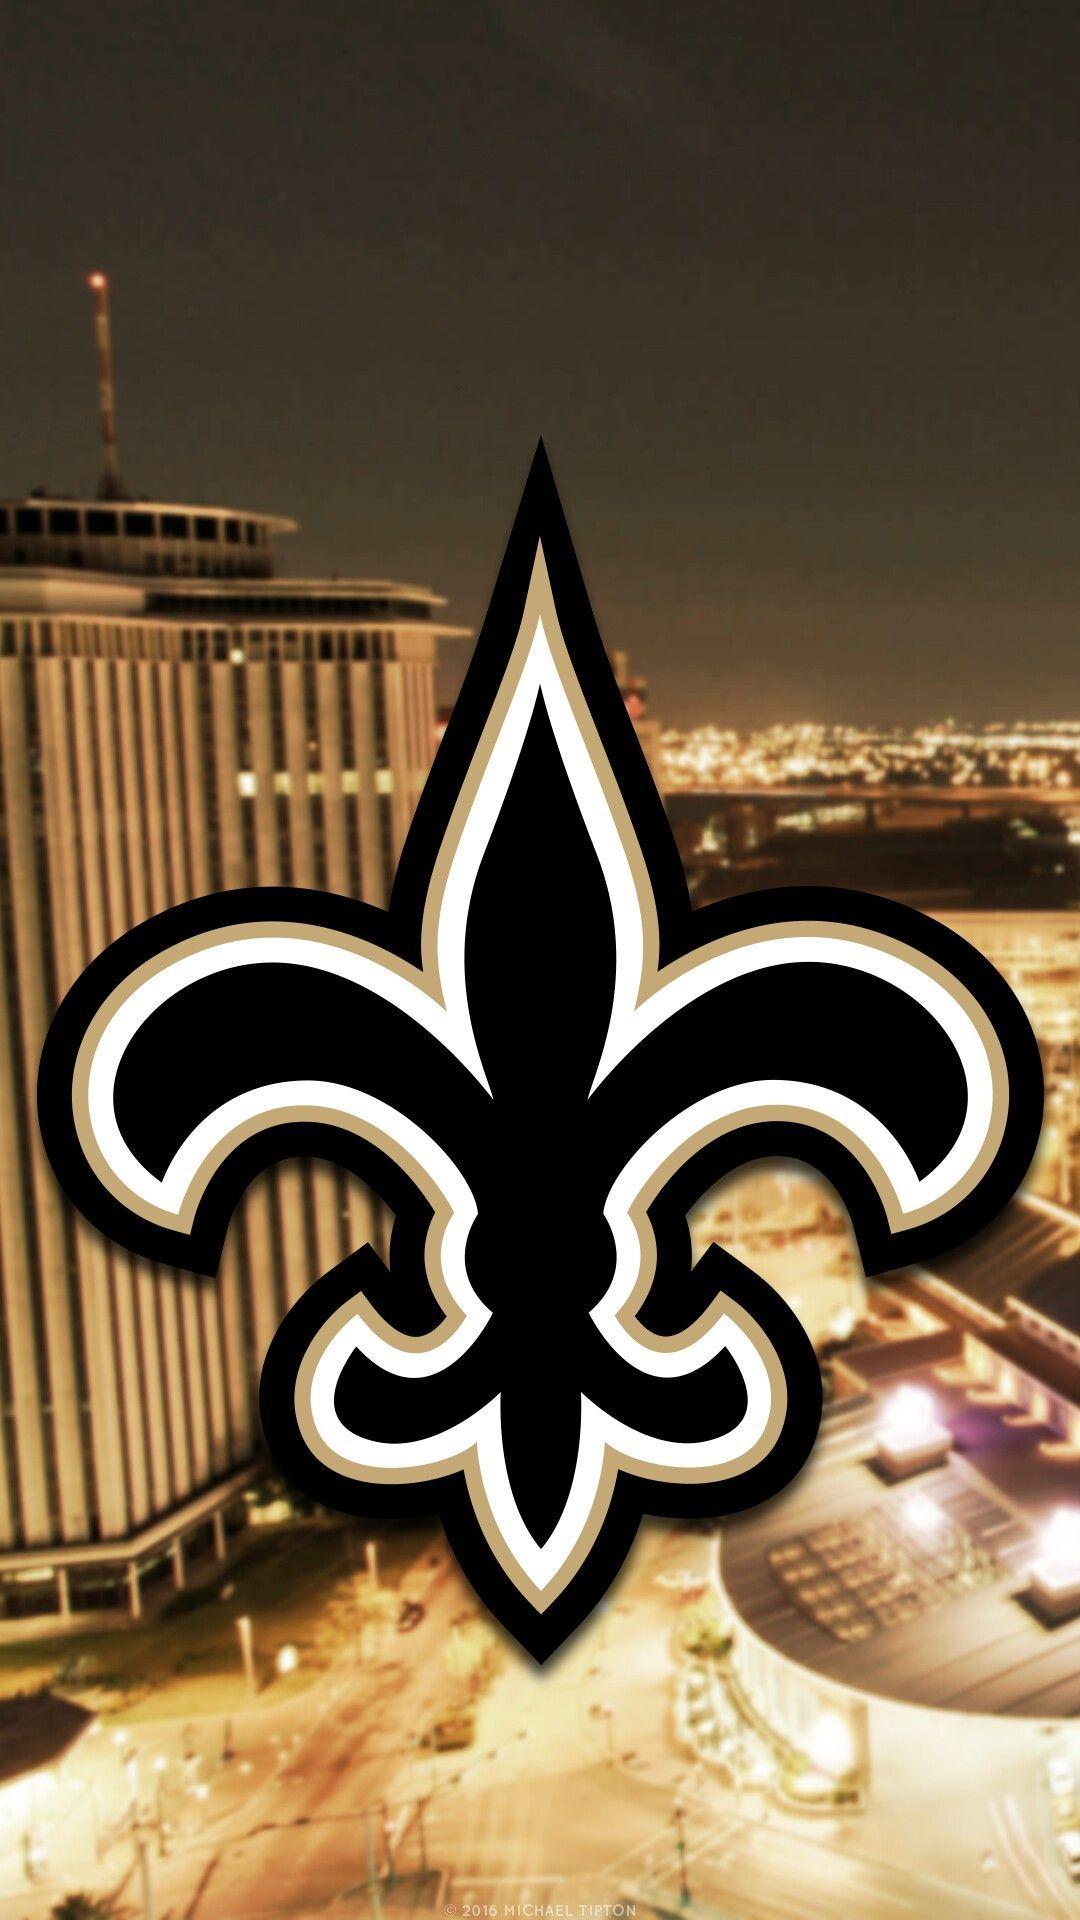 New Orleans Saints IPhone & Android Wallpaper. New orleans